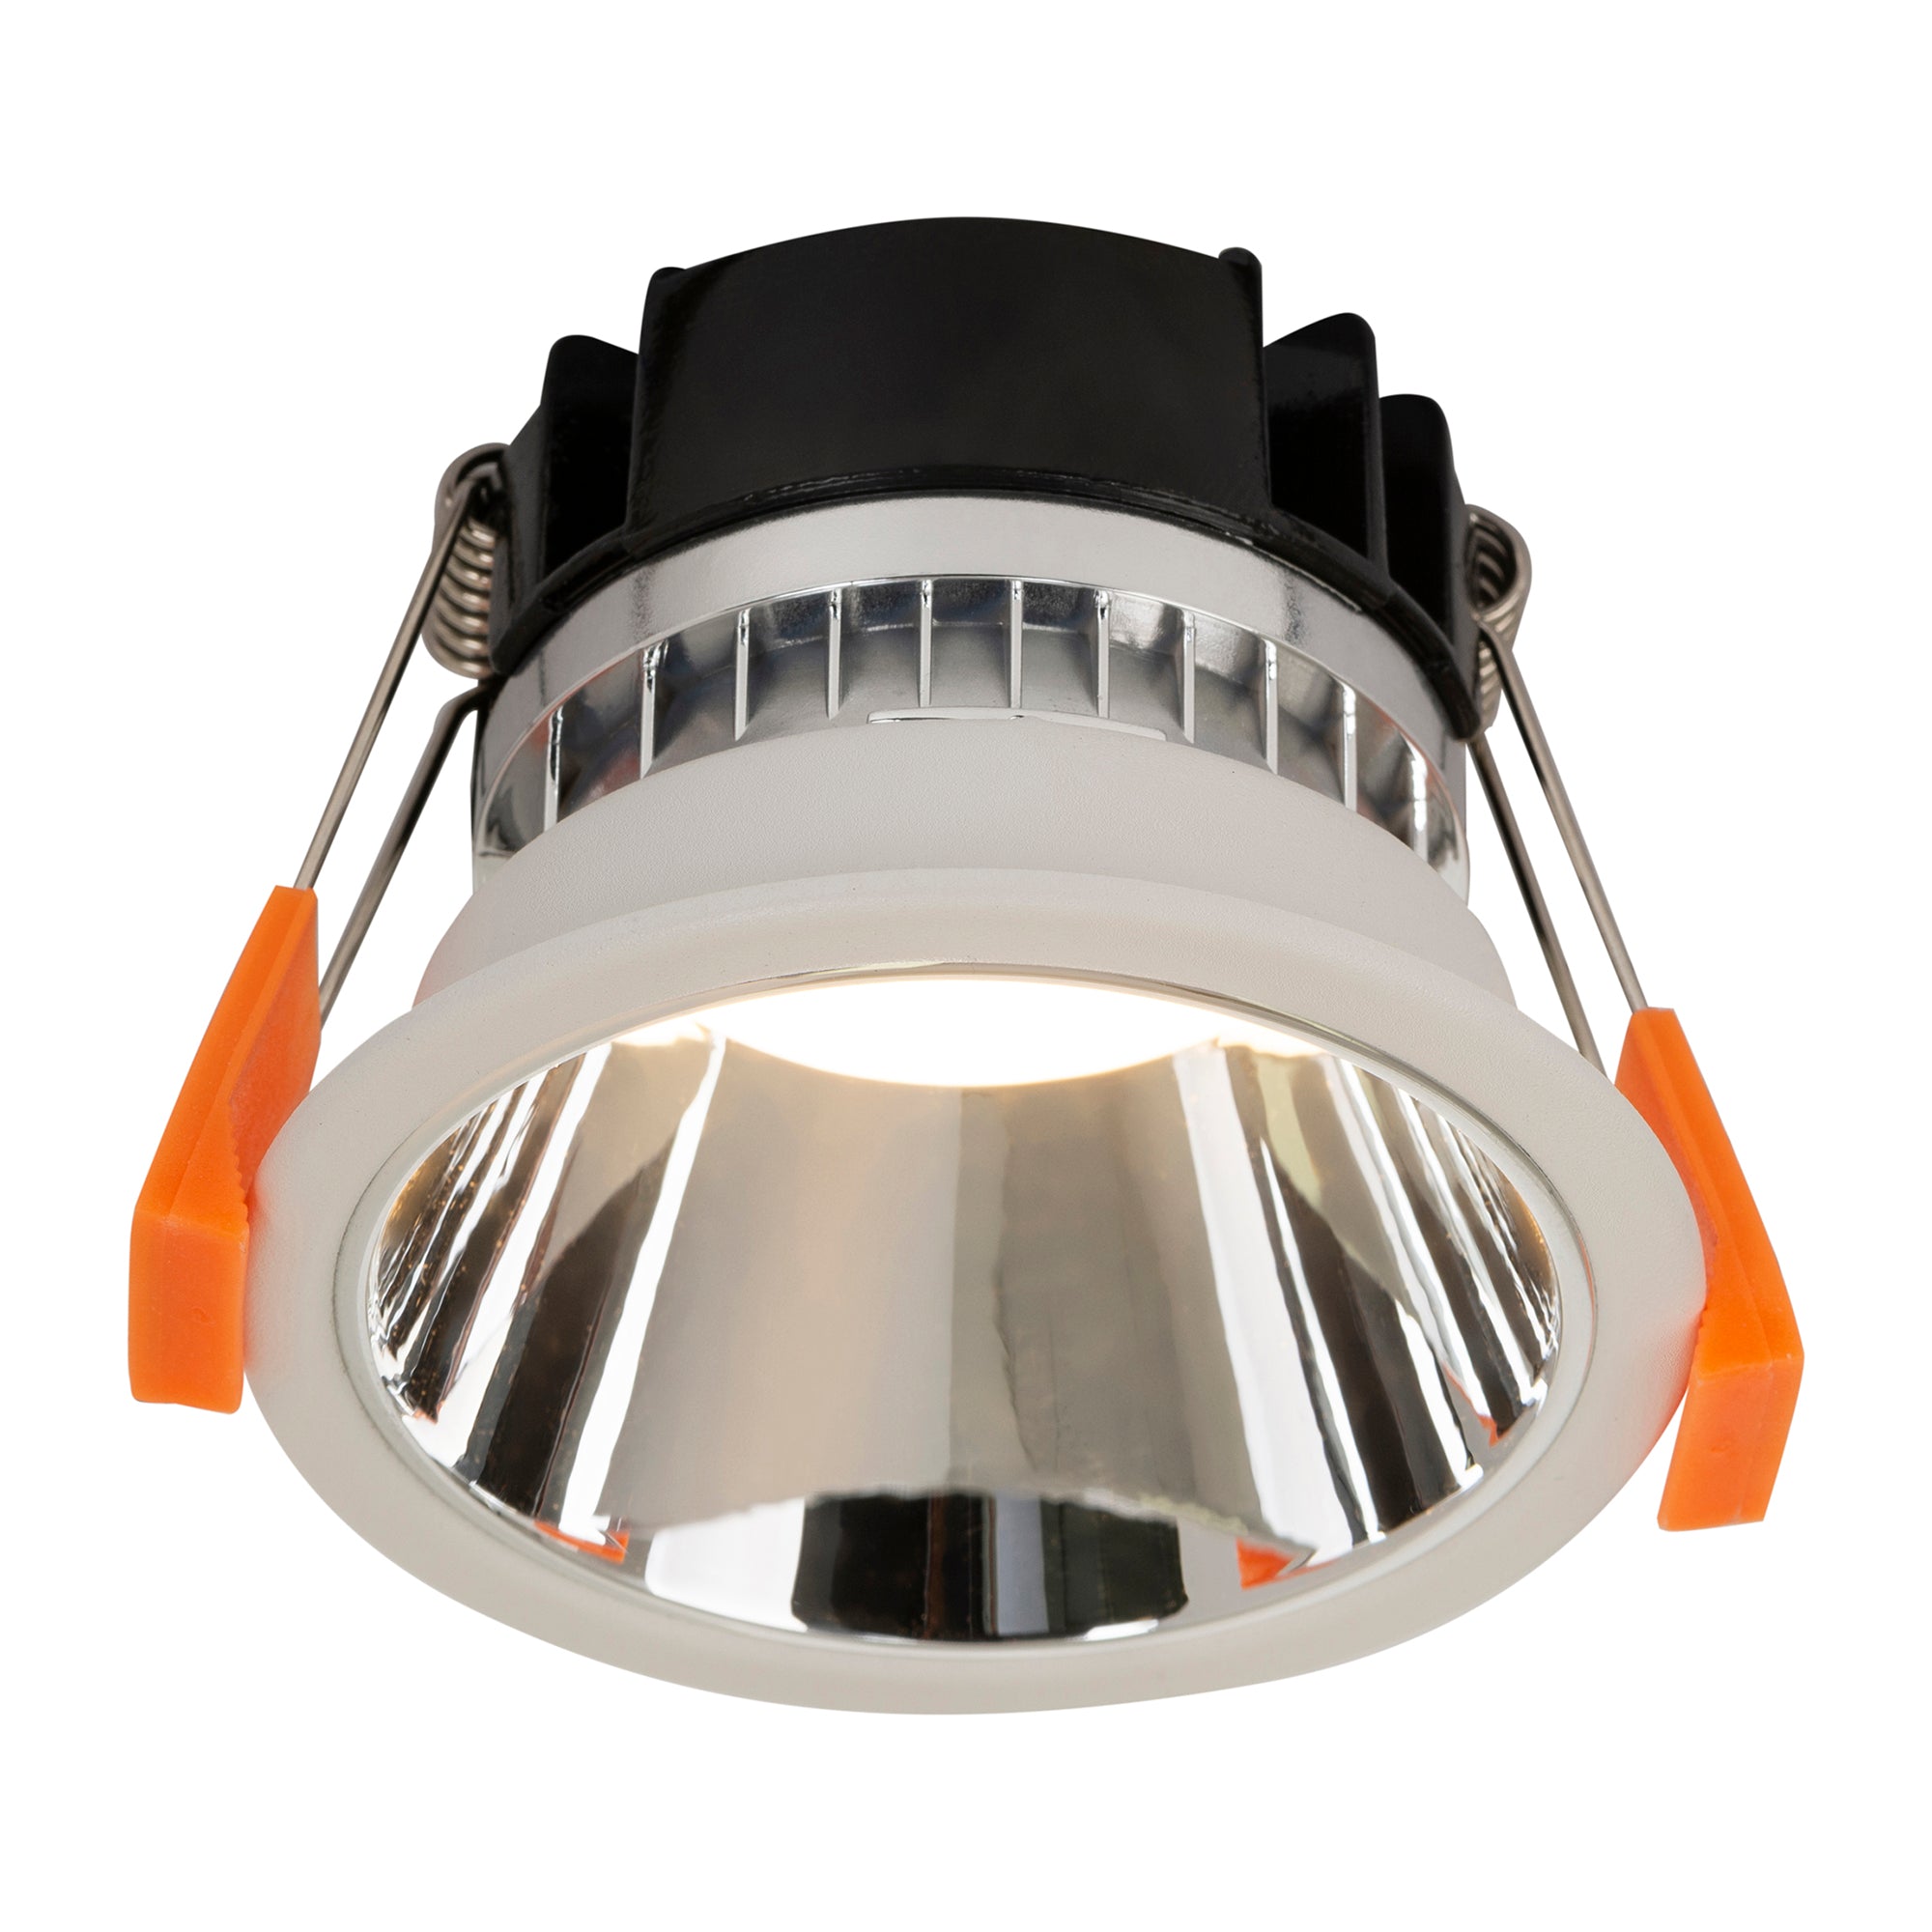 HV5529D2W-WC - Gleam White with Chrome Insert Fixed Dim to Warm LED Downlight